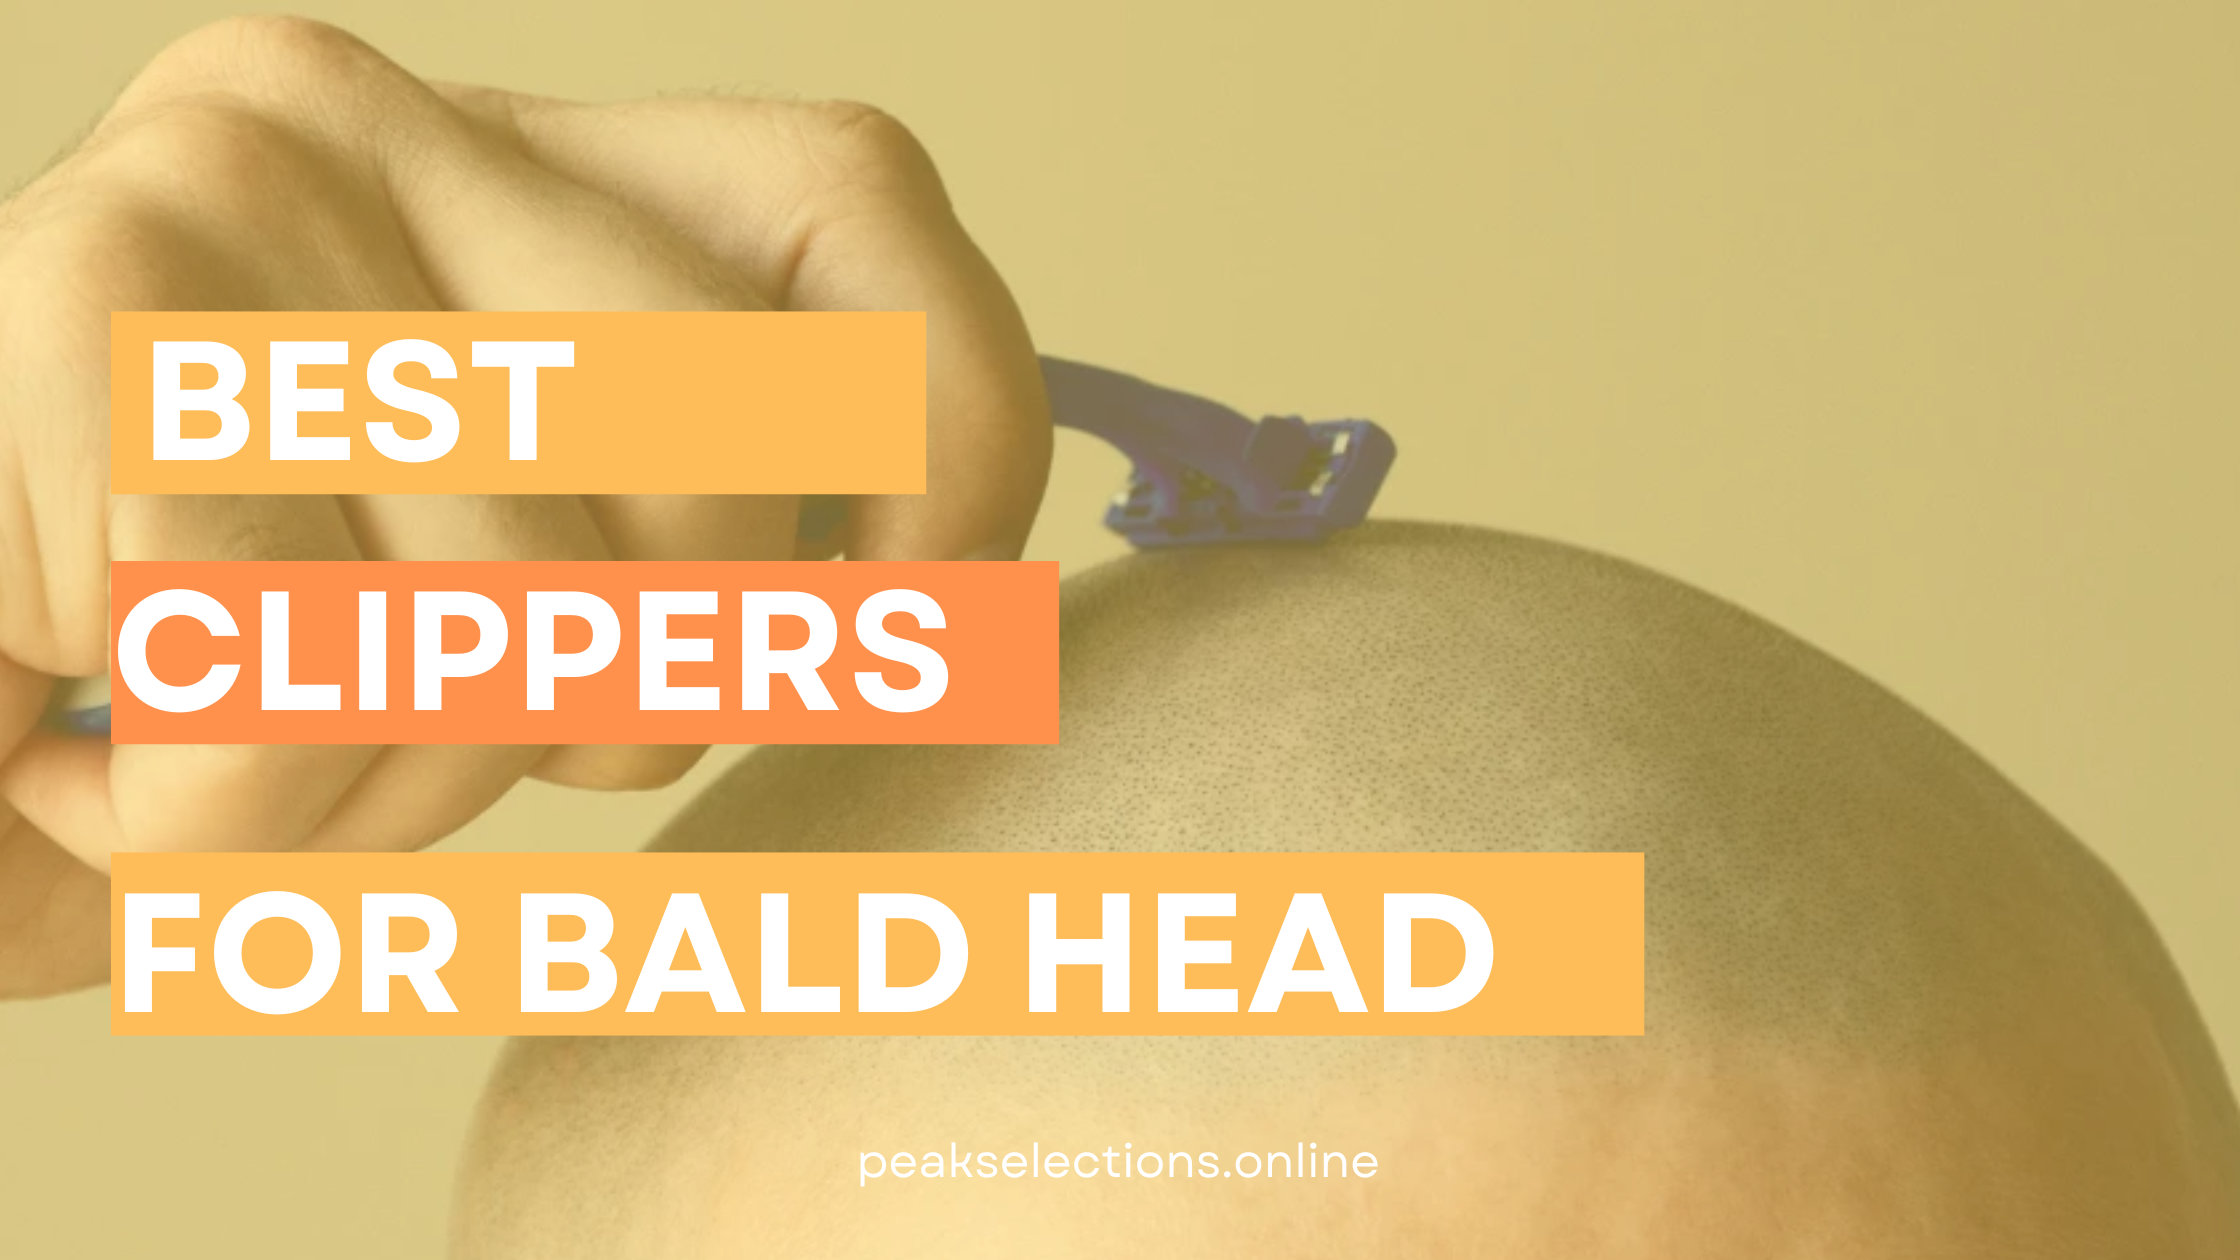 Best clippers for bald head